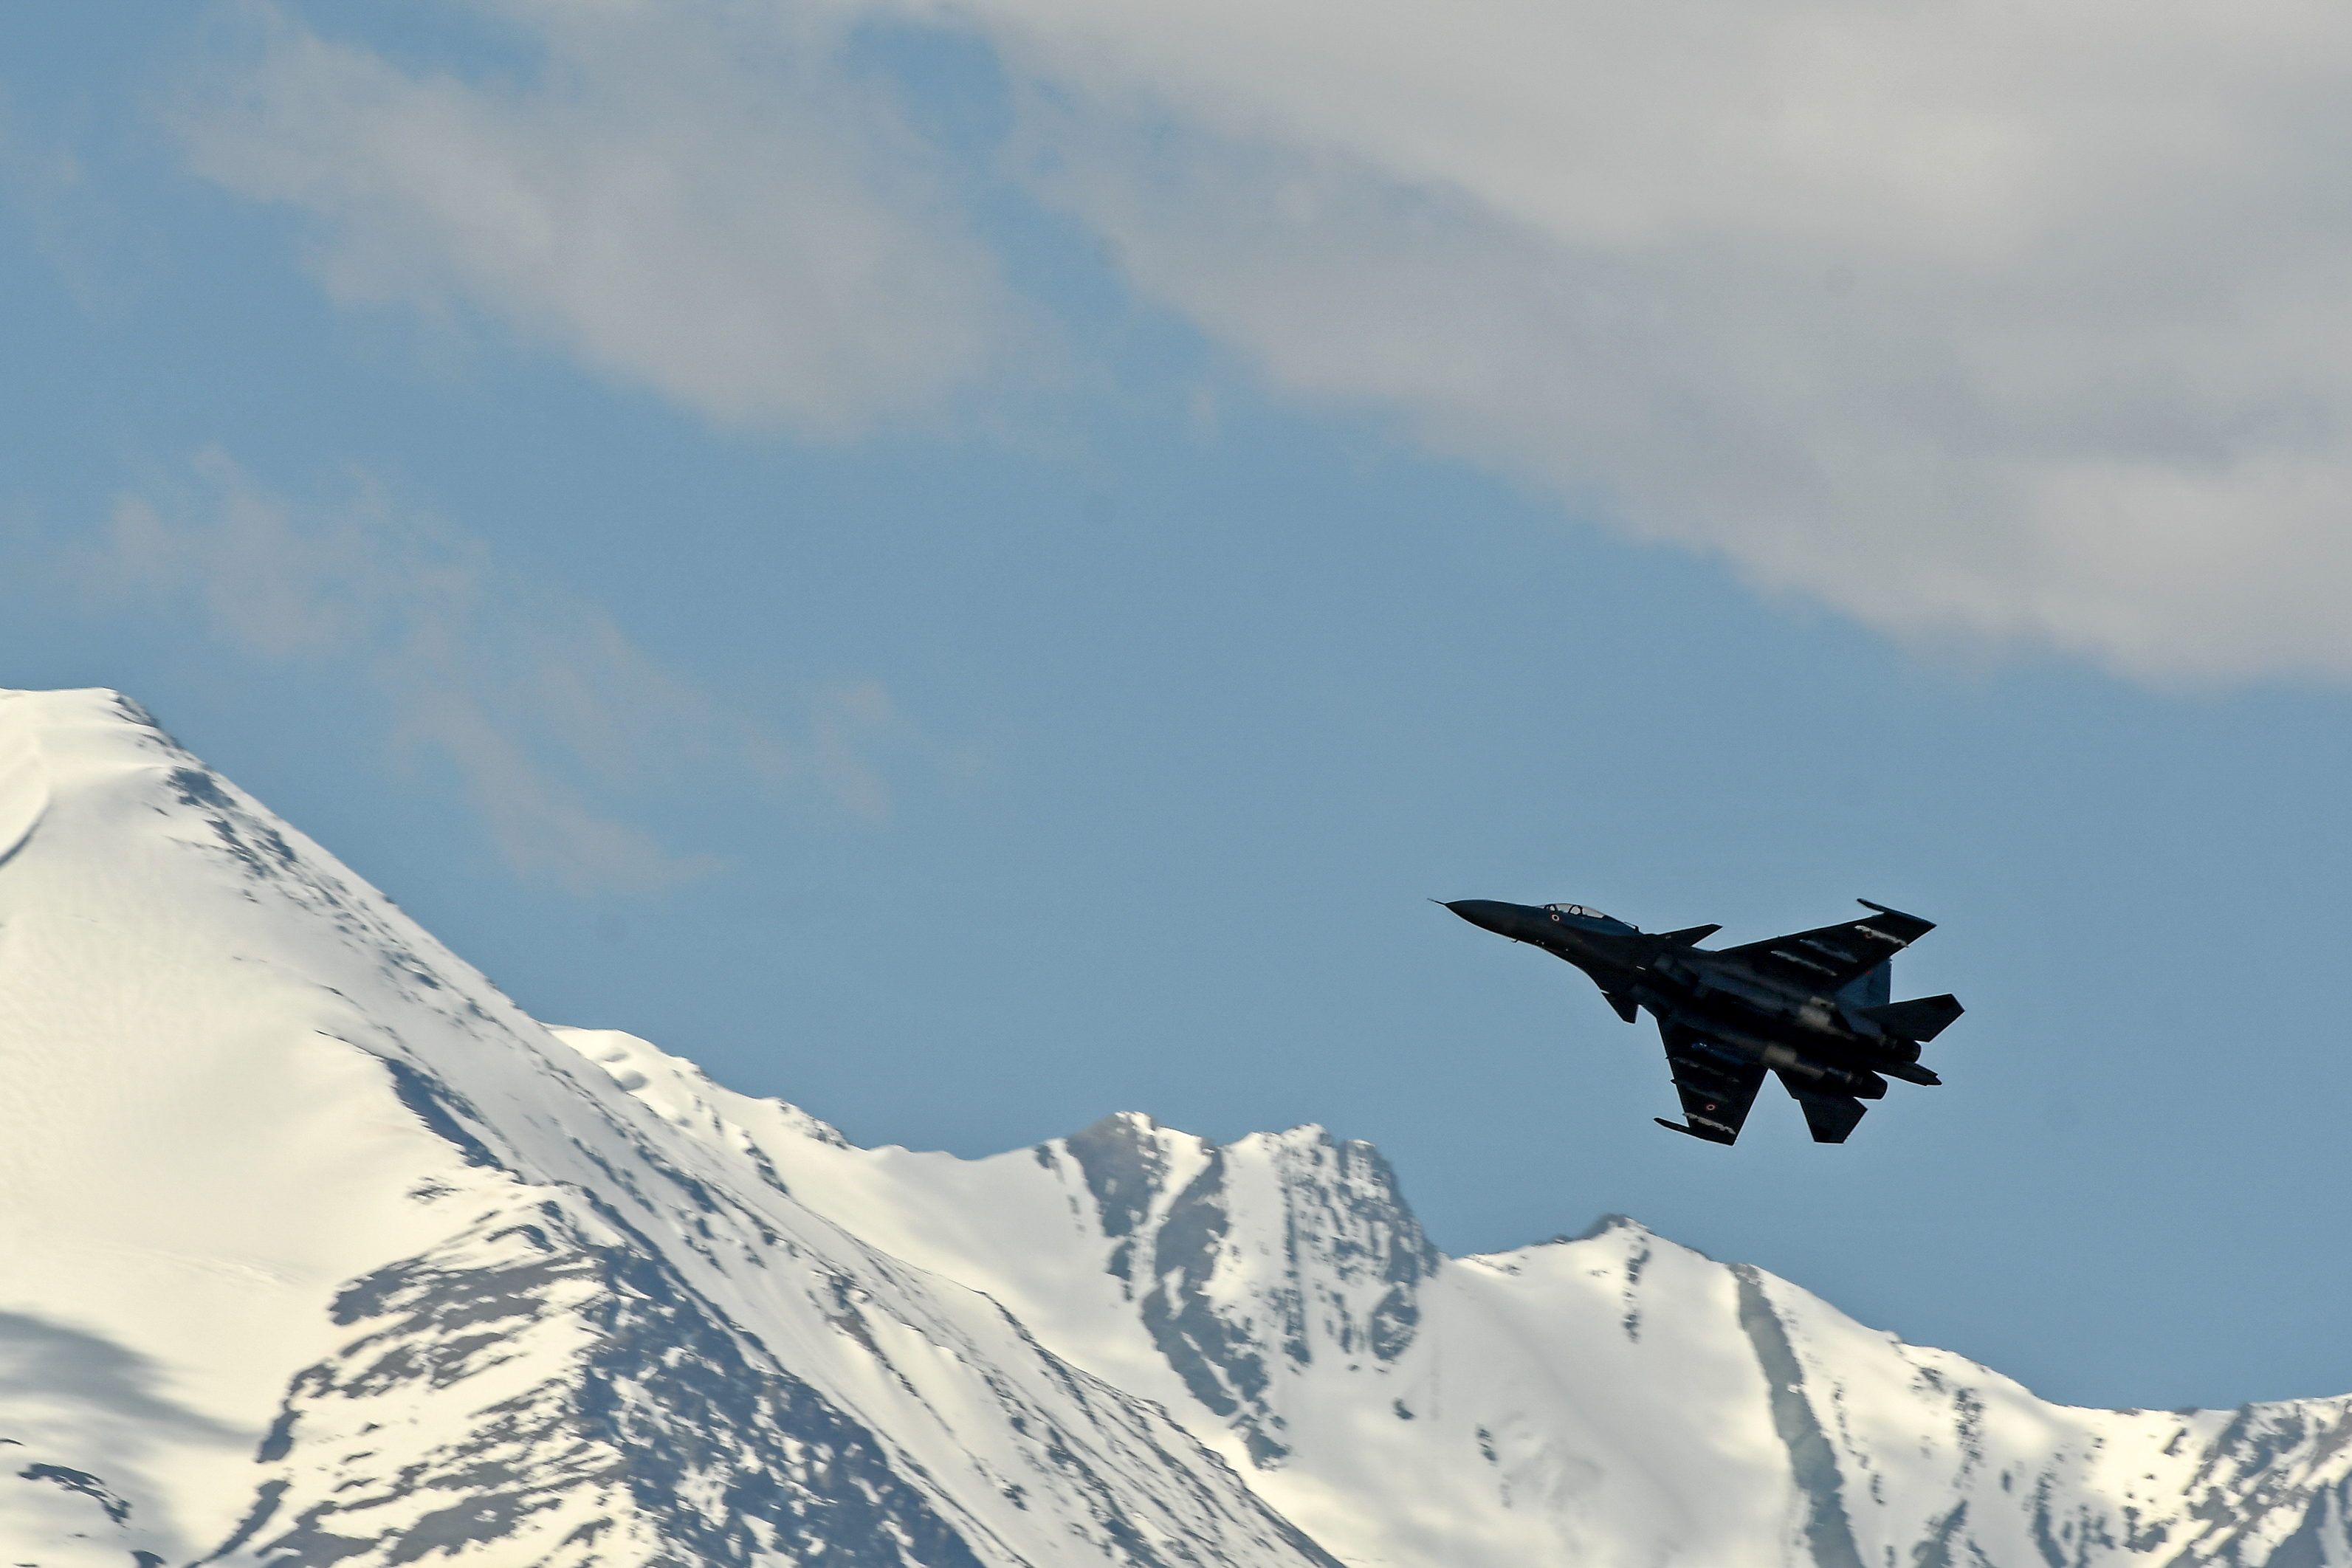 An Indian Air Force aircraft is seen against the backdrop of mountains surrounding Leh, the joint capital of the union territory of Ladakh, on June 27, 2020. (TAUSEEF MUSTAFA/AFP via Getty Images)